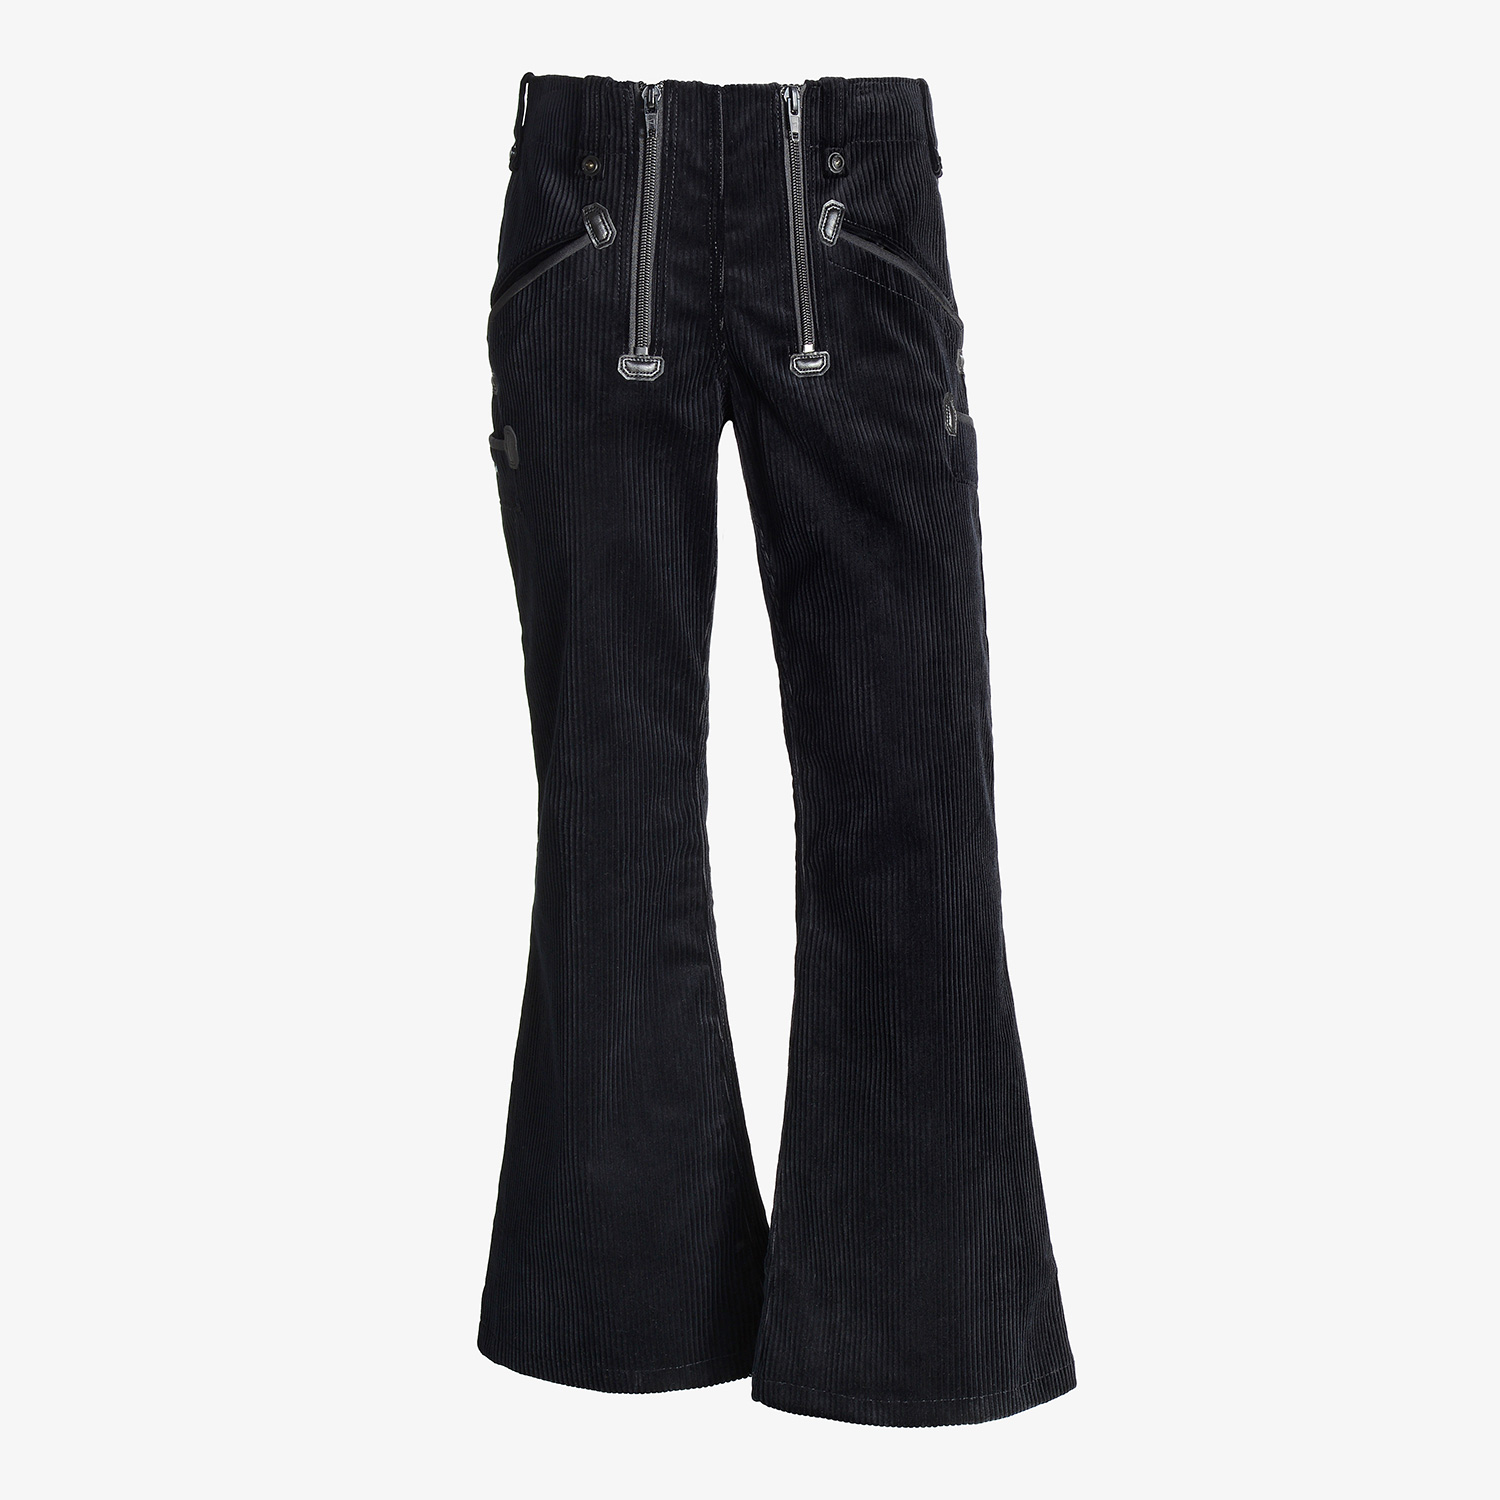 DARIUS trousers heavy corduroy with bell bottom